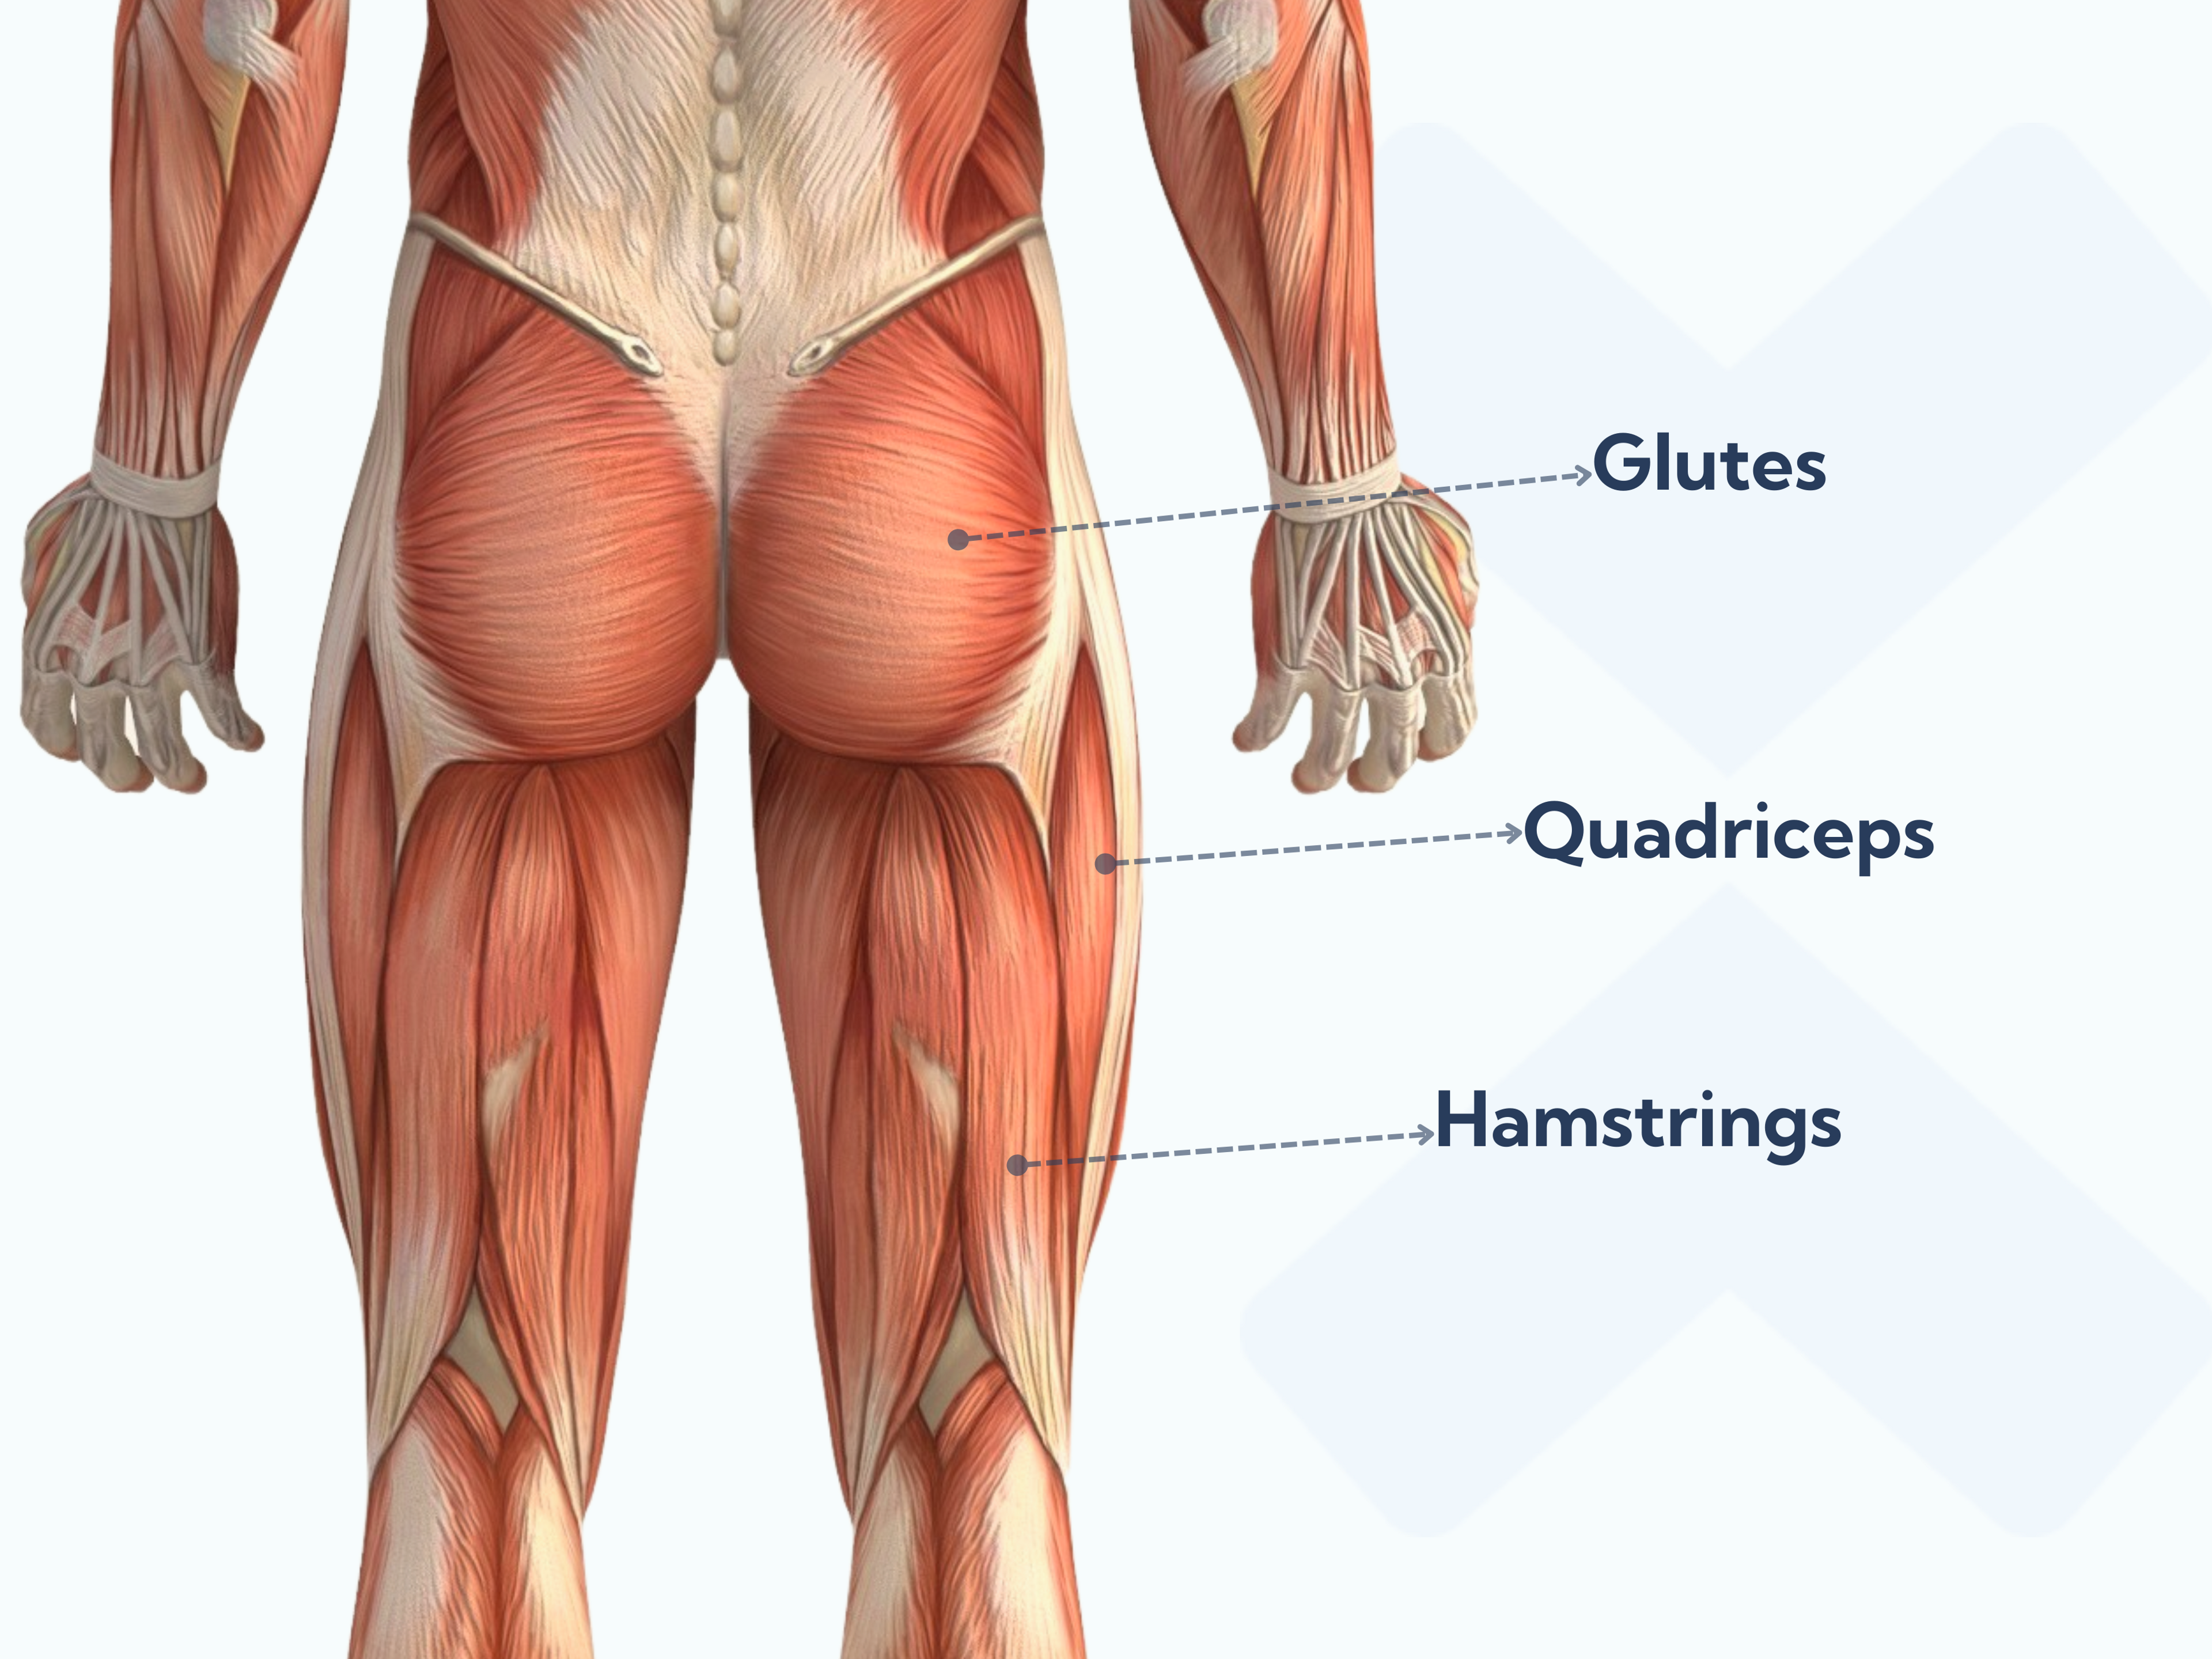 These are the muscles a lunge works: Glutes, quadriceps and hamstrings